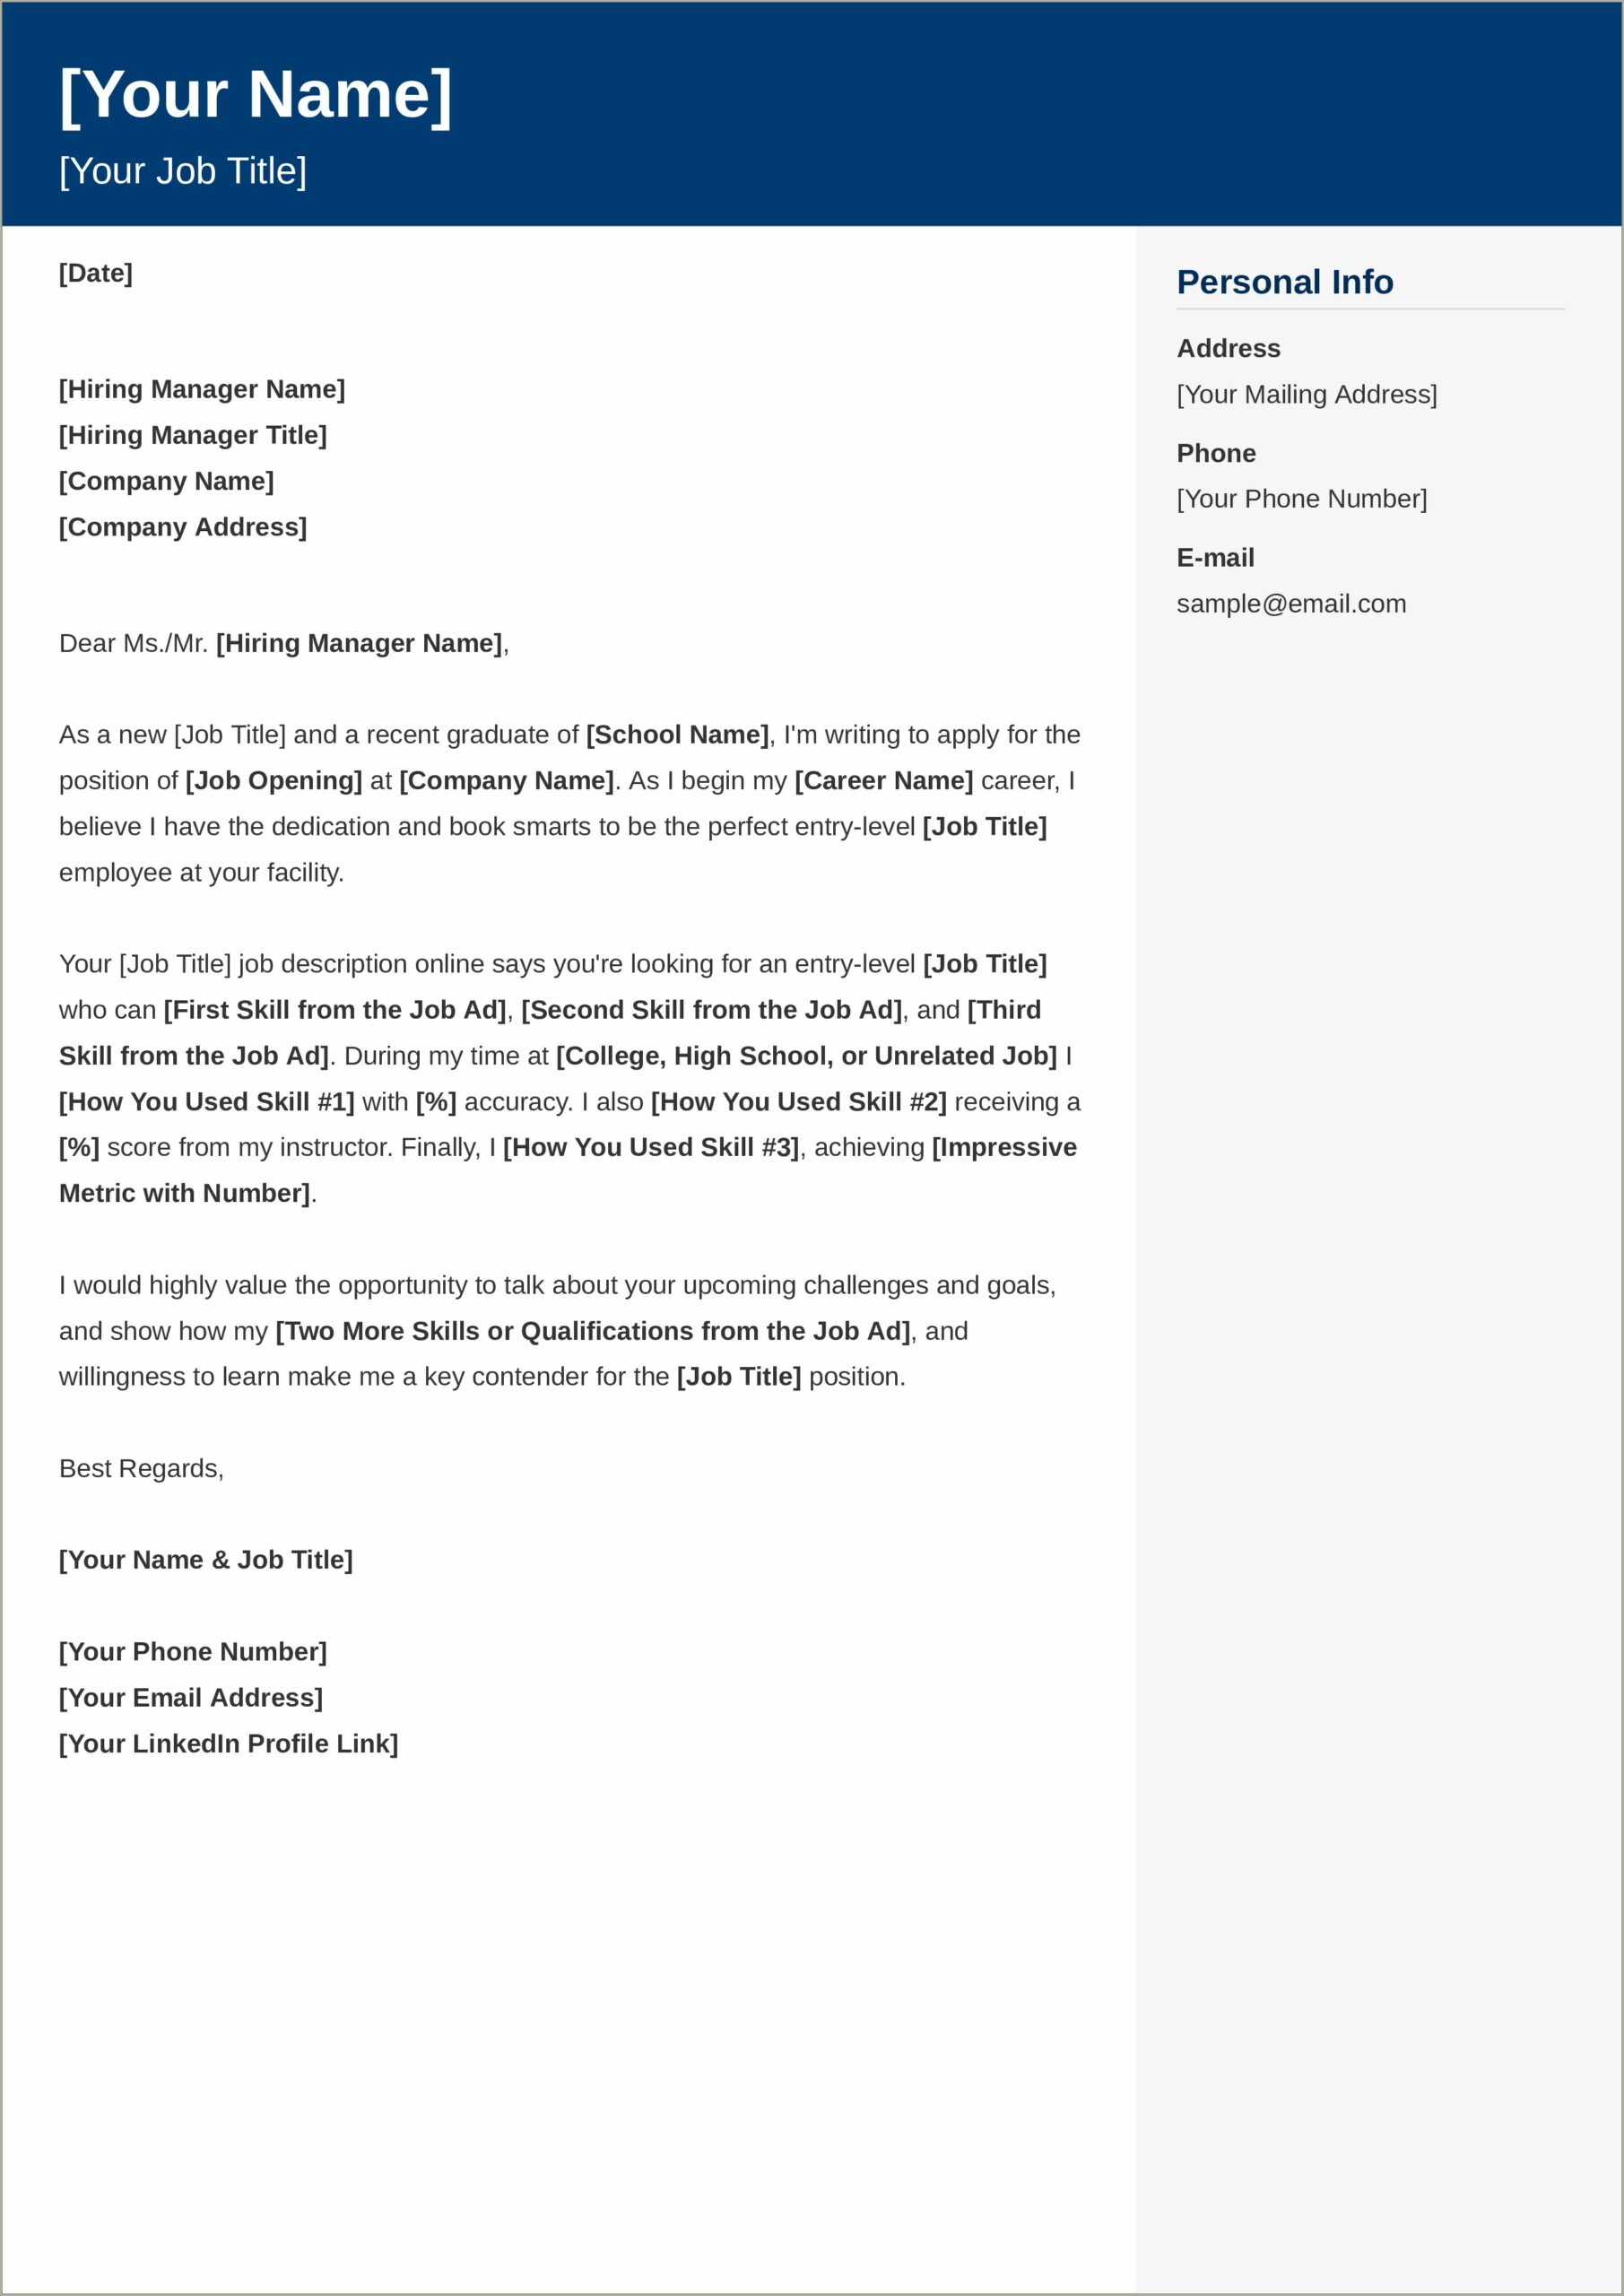 Sample Of A Resume Cover Letter General